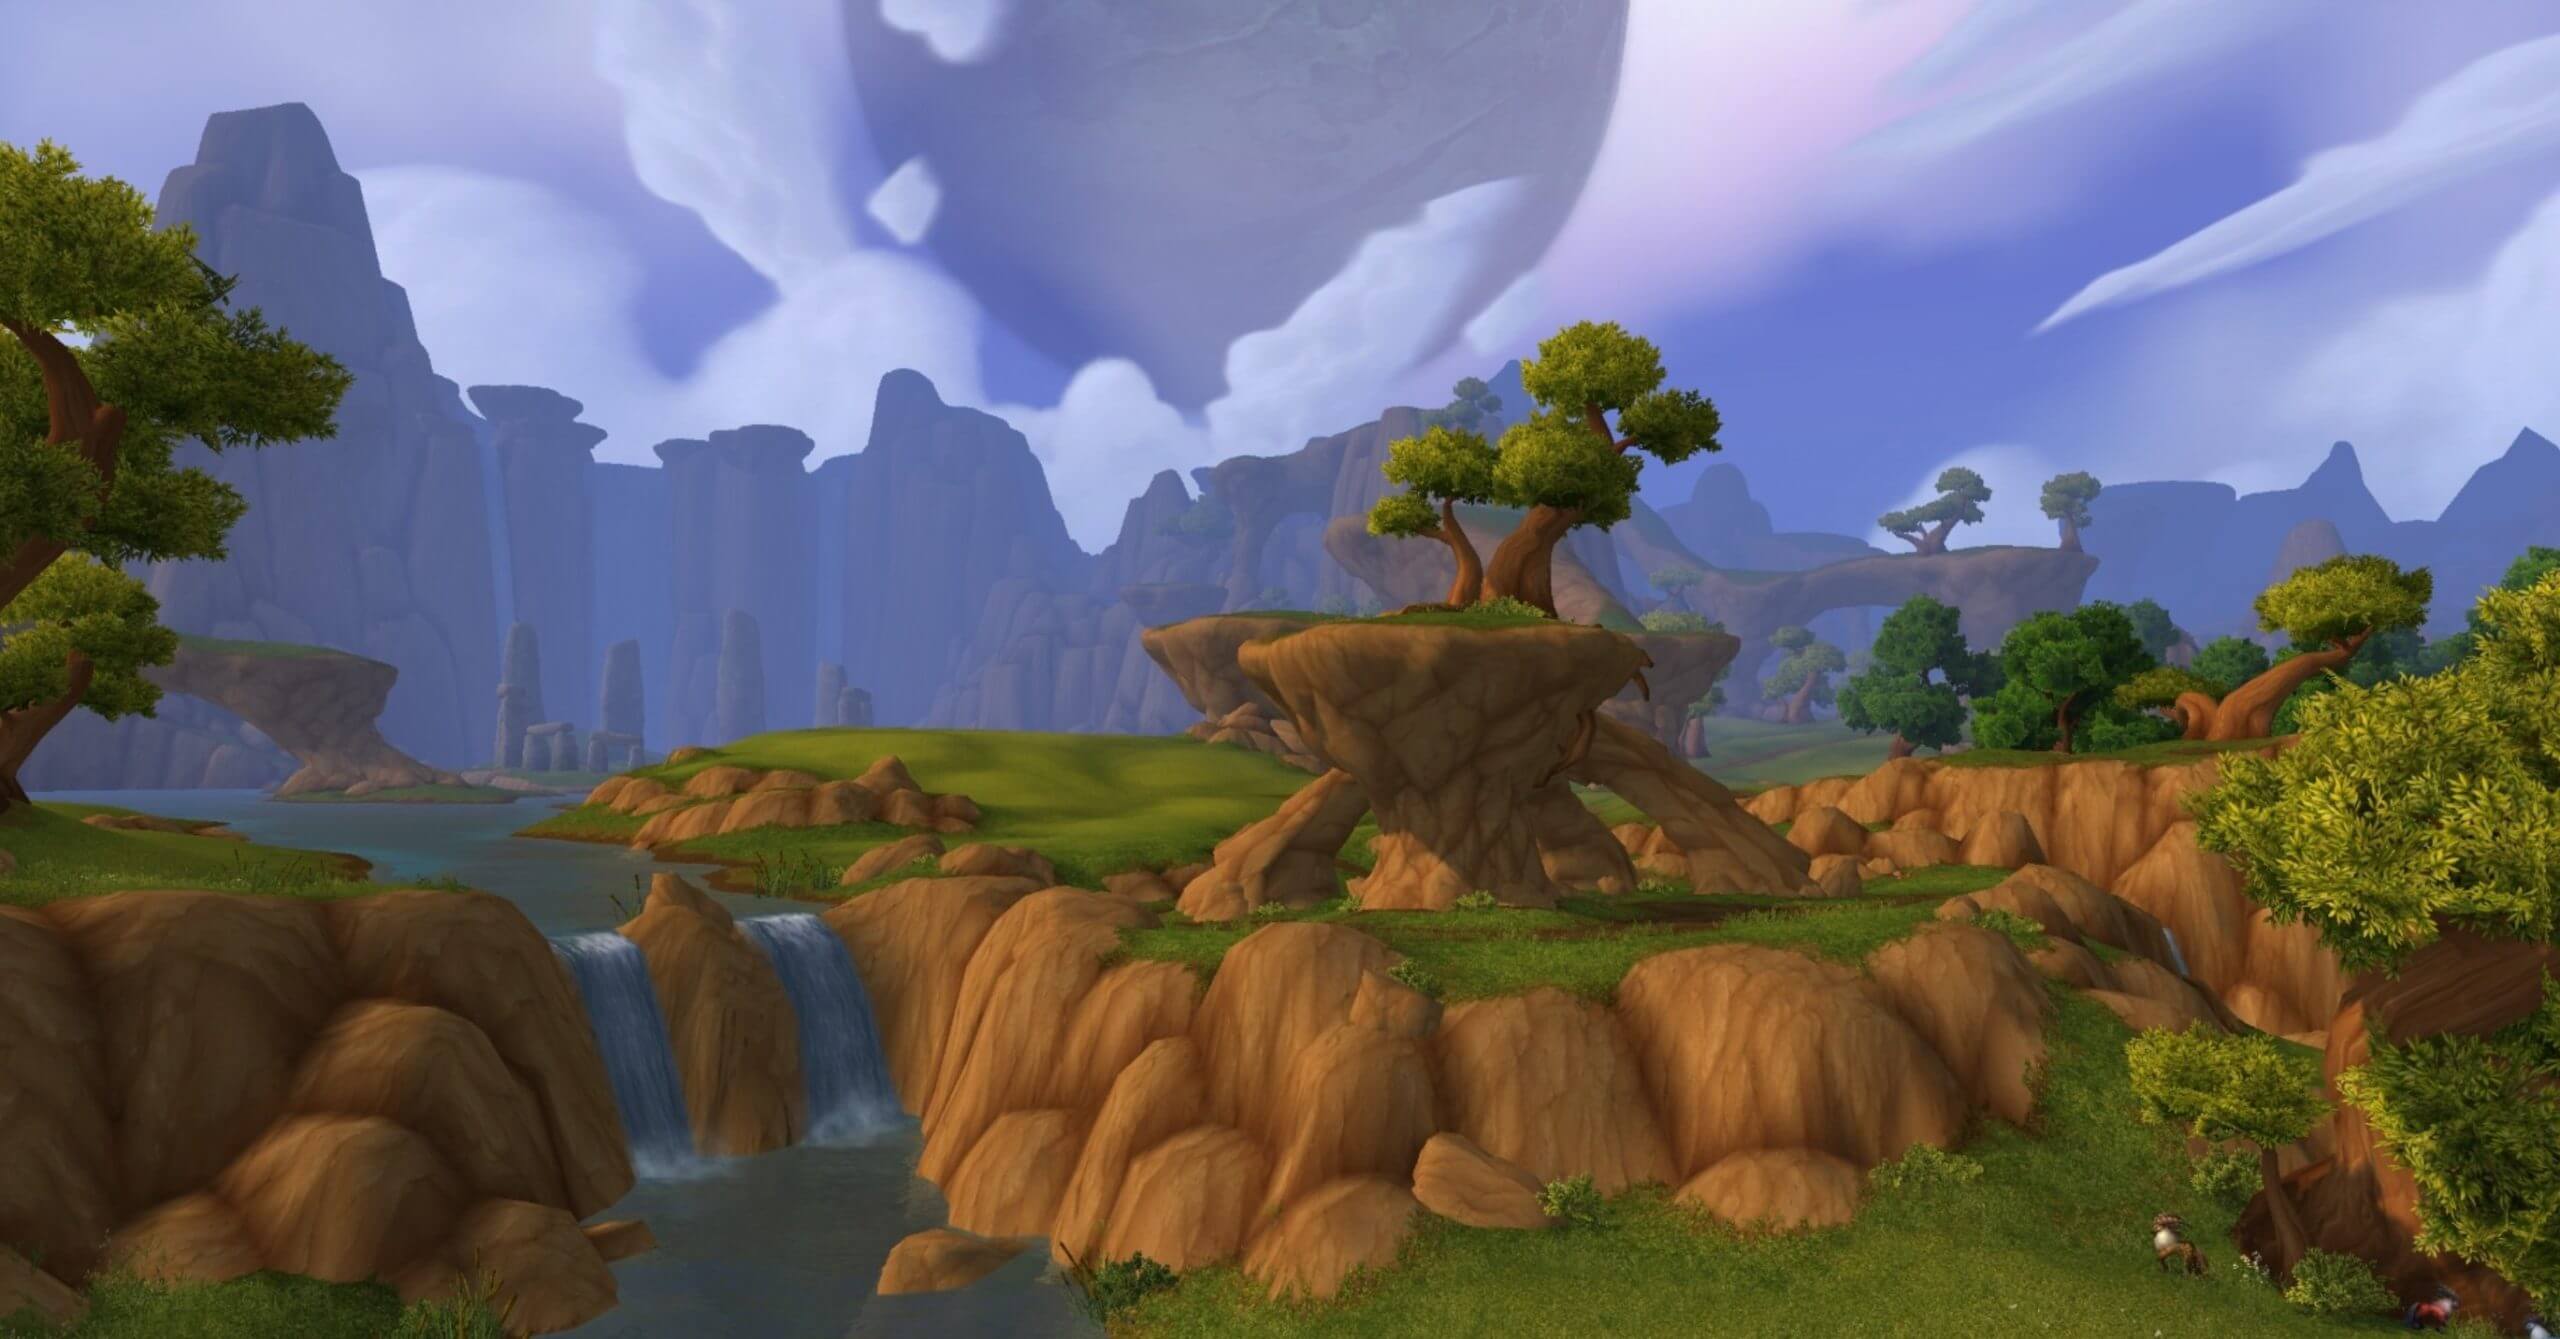 Landscape from World of Warcraft